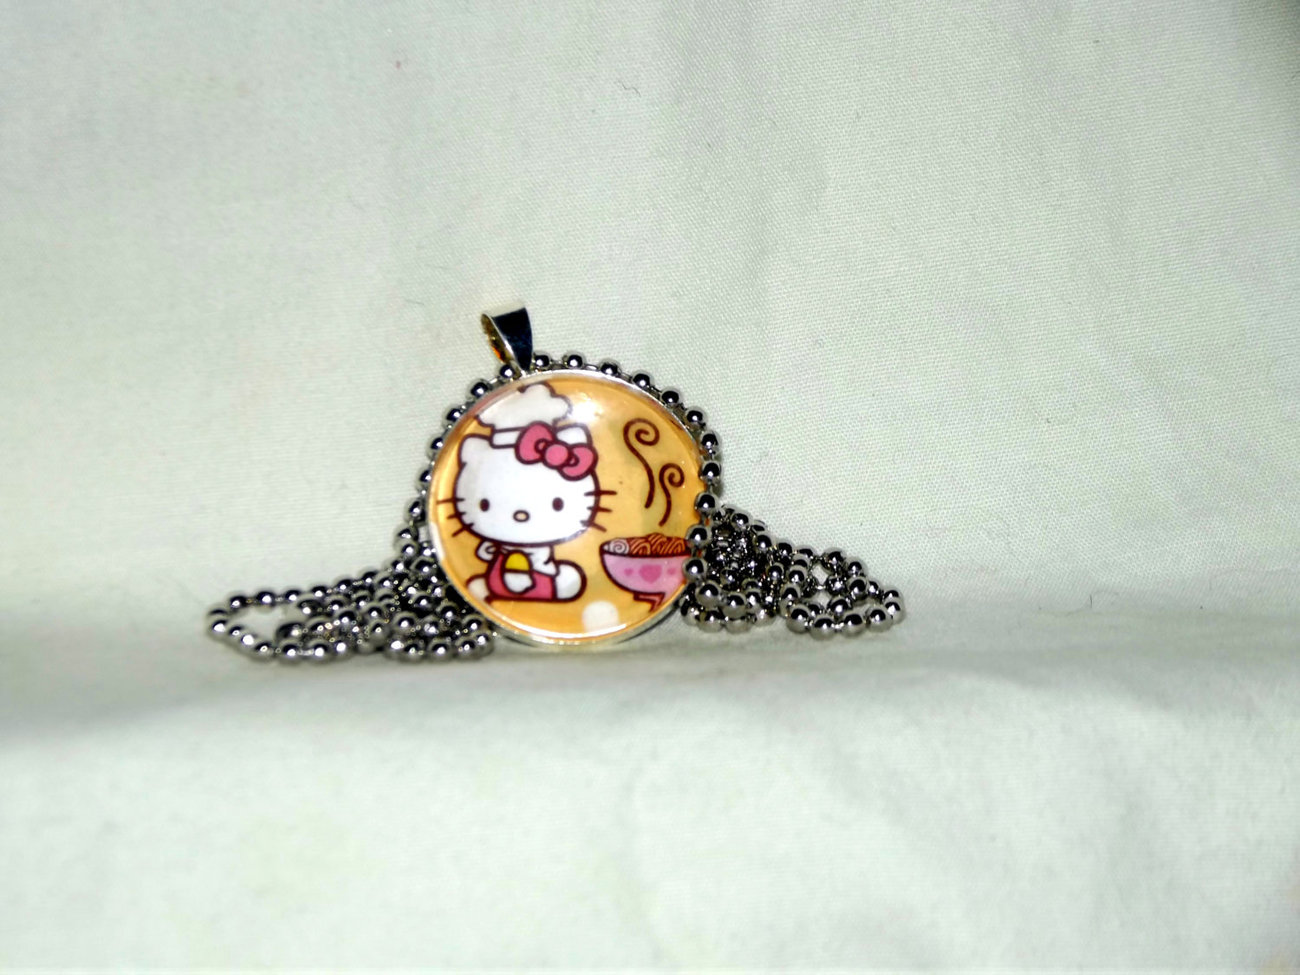 Hello Kitty Pendant Necklace with glass insert kawaii - $6.00